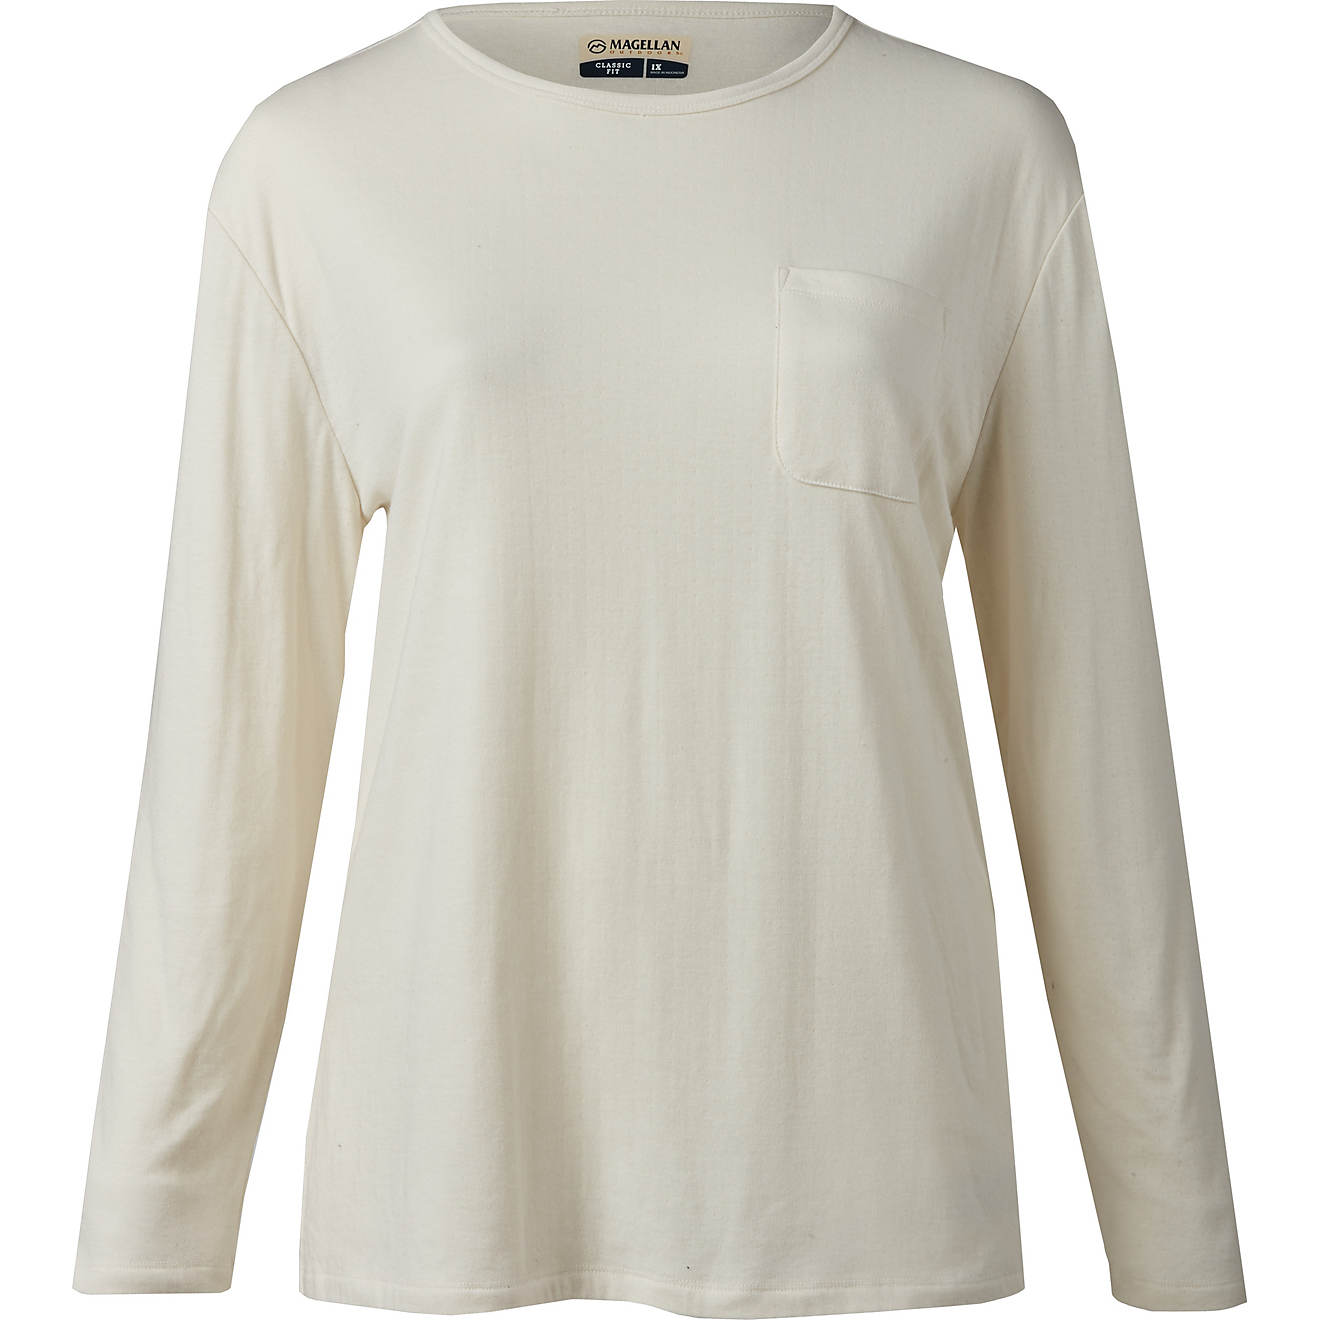 Magellan Outdoors Women's Plus Size Willow Creek Long Sleeve Knit Top                                                            - view number 1